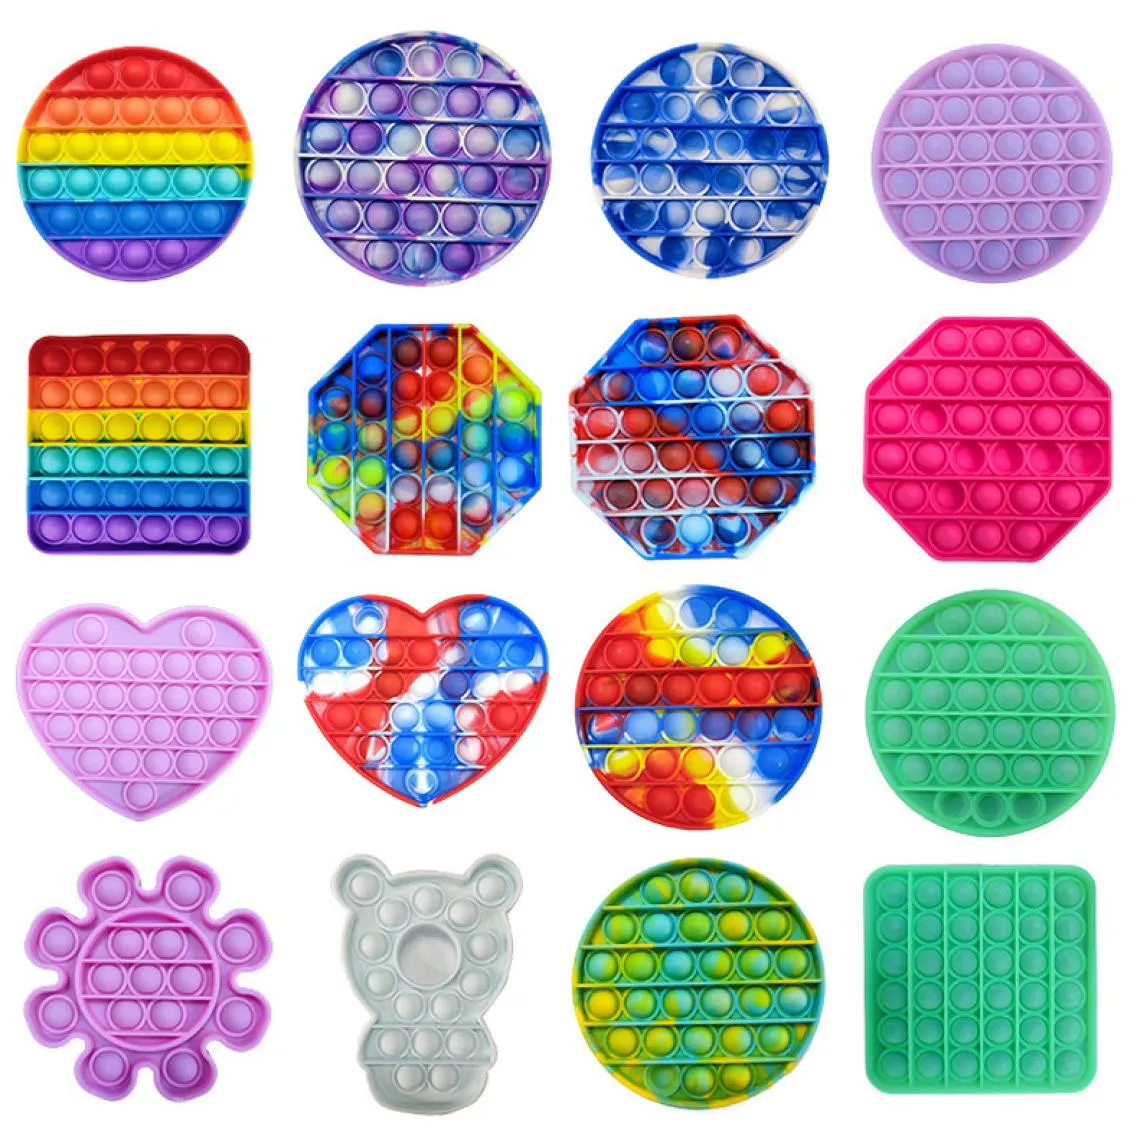 Fluore scence Push pers Bubble Sensory party Toys Autism Special Needs Stress Reliever It Squeeze Board Game Anxiety Kids Adults Sale decompresstion toy4178198